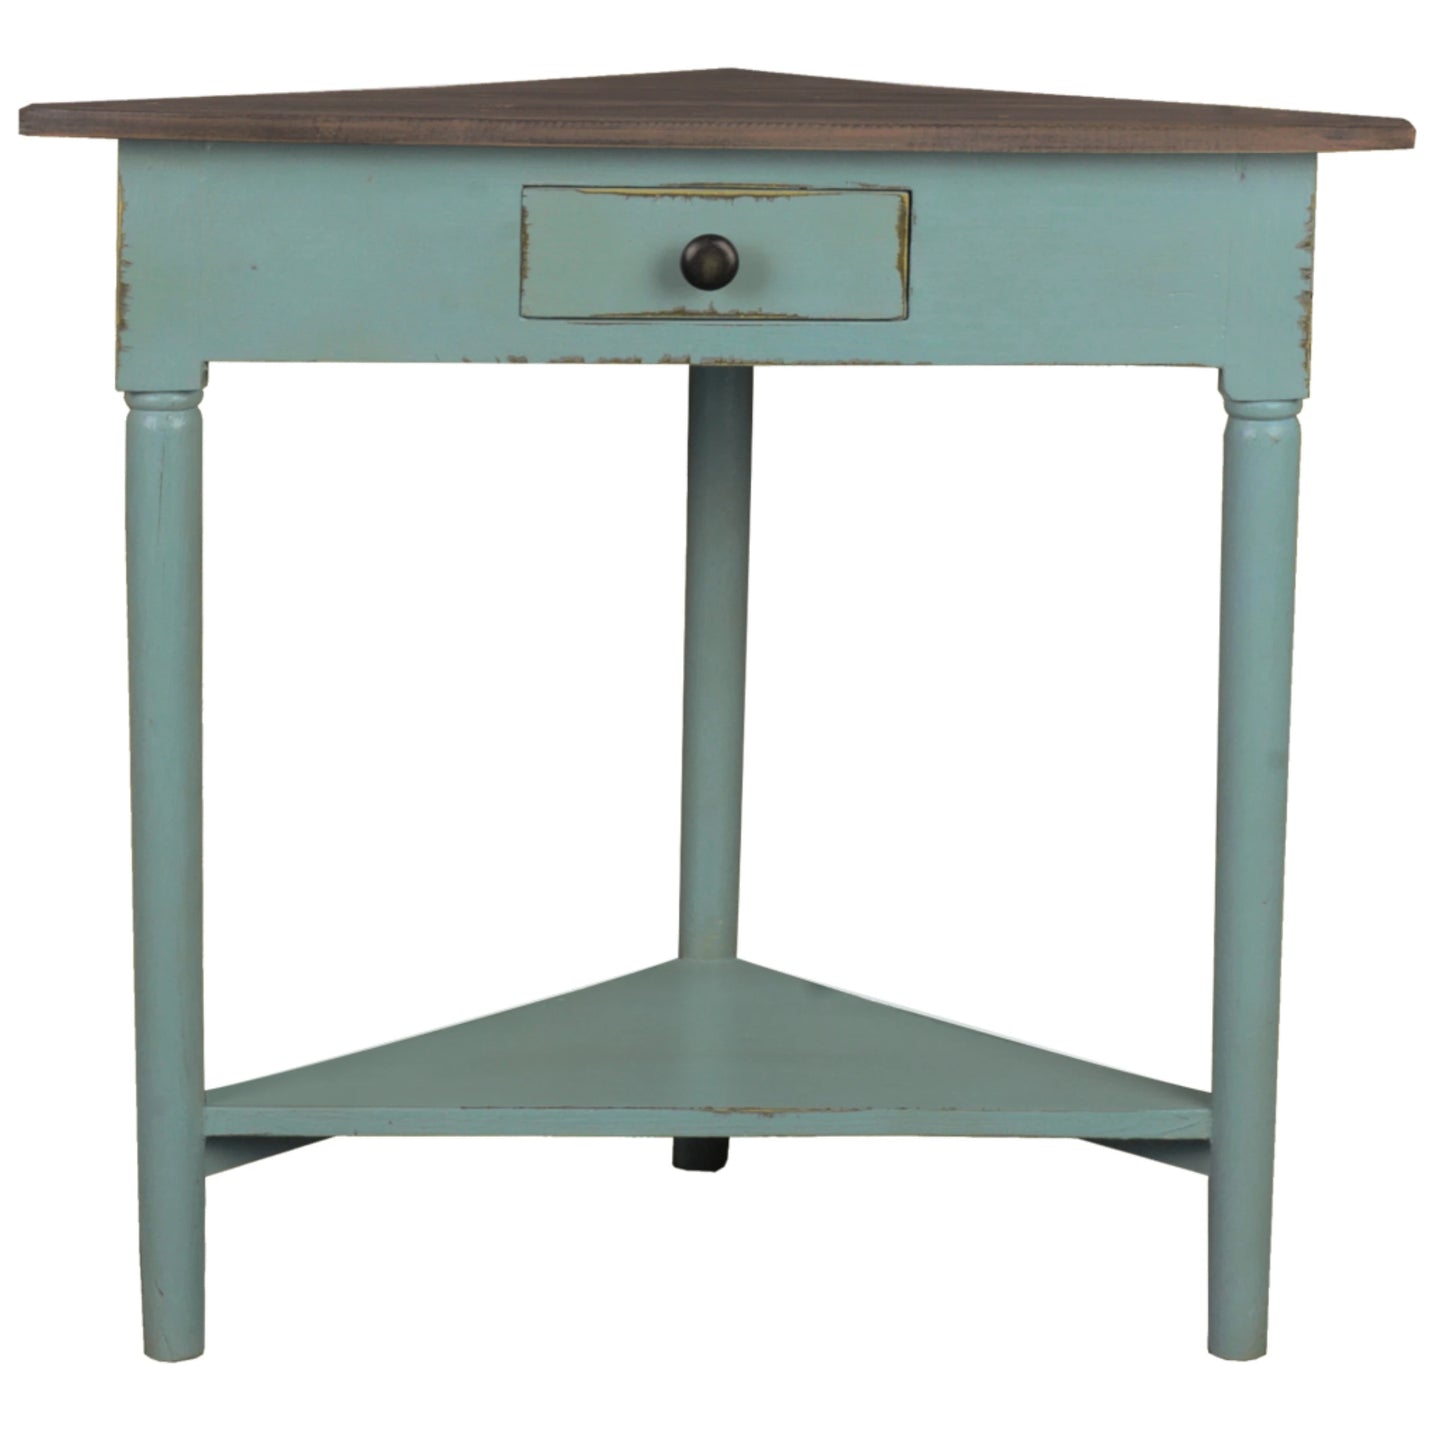 Sunset Trading Cottage Corner End Table with Shelf | Distressed Beach Blue/ Raftwood Brown Solid Wood | Fully Assembled Triangle Accent Stand